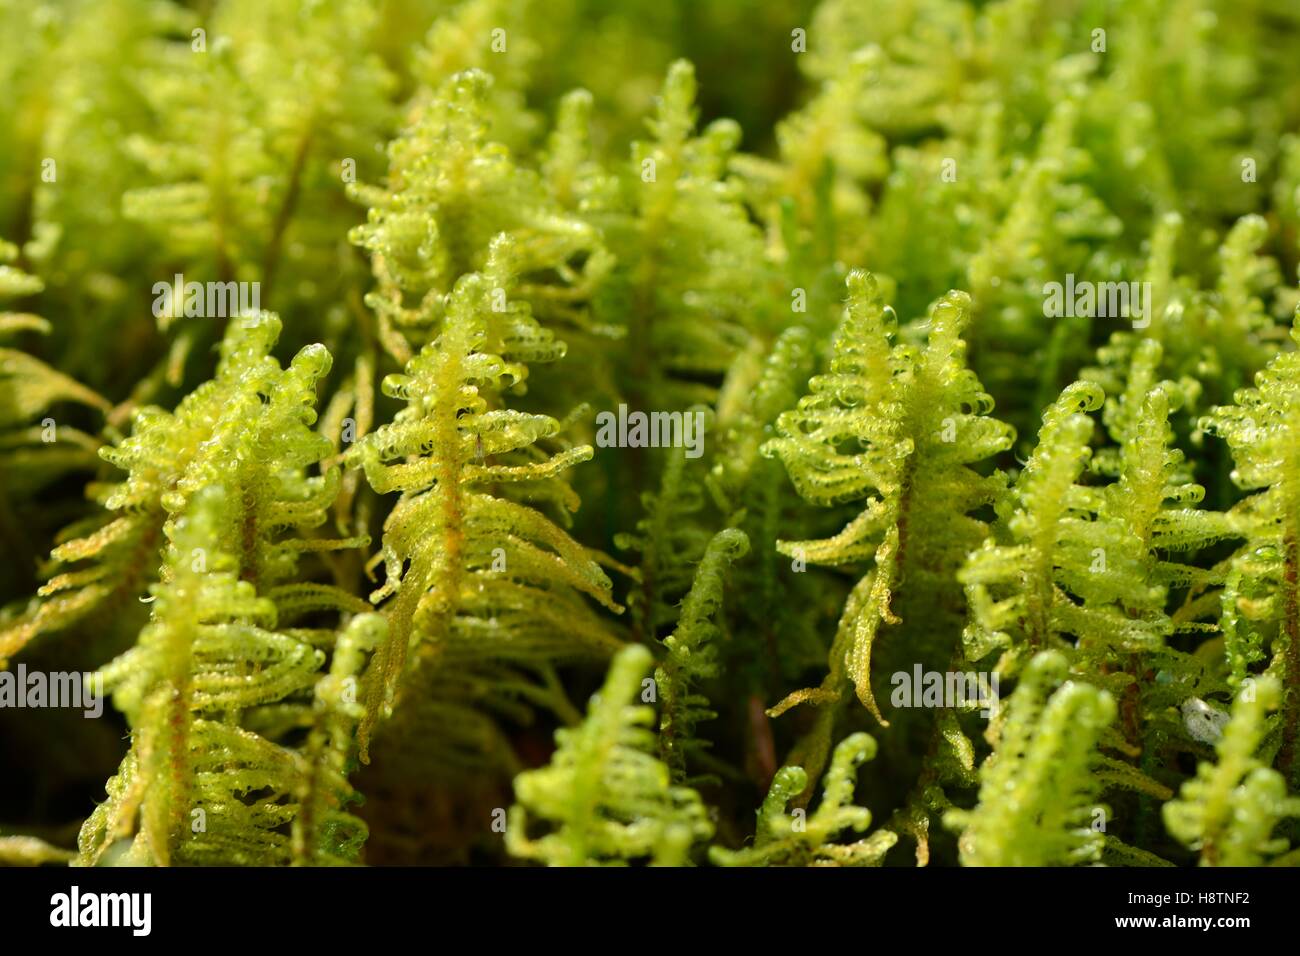 https://www.alamy.com/stock-photo-greater-whipwort-bazzania-trilobata-moss-on-rock-in-a-forest-in-scree-125933558.html